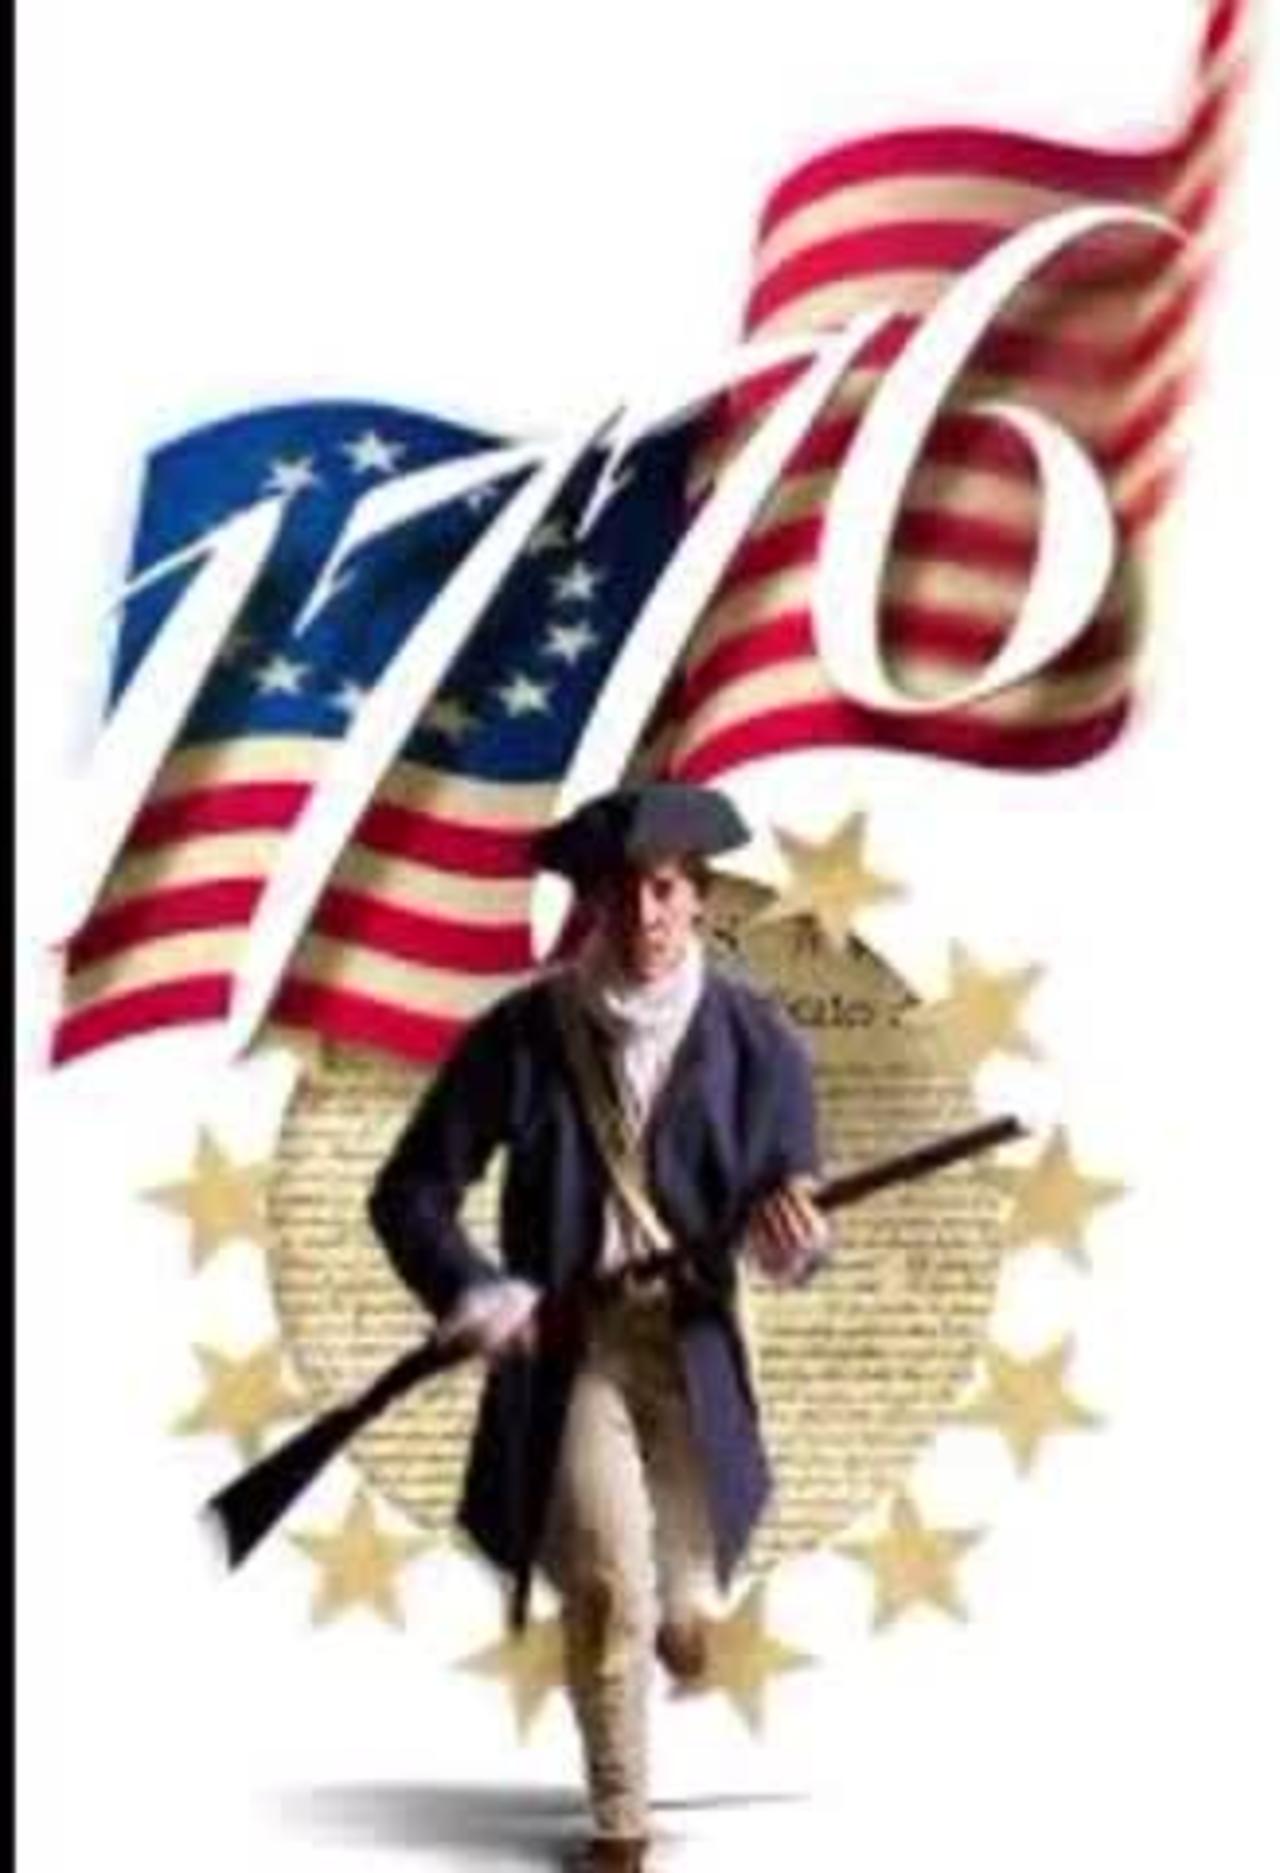 Live - 1776 Restoration Movement - Evening Meeting and Hang about